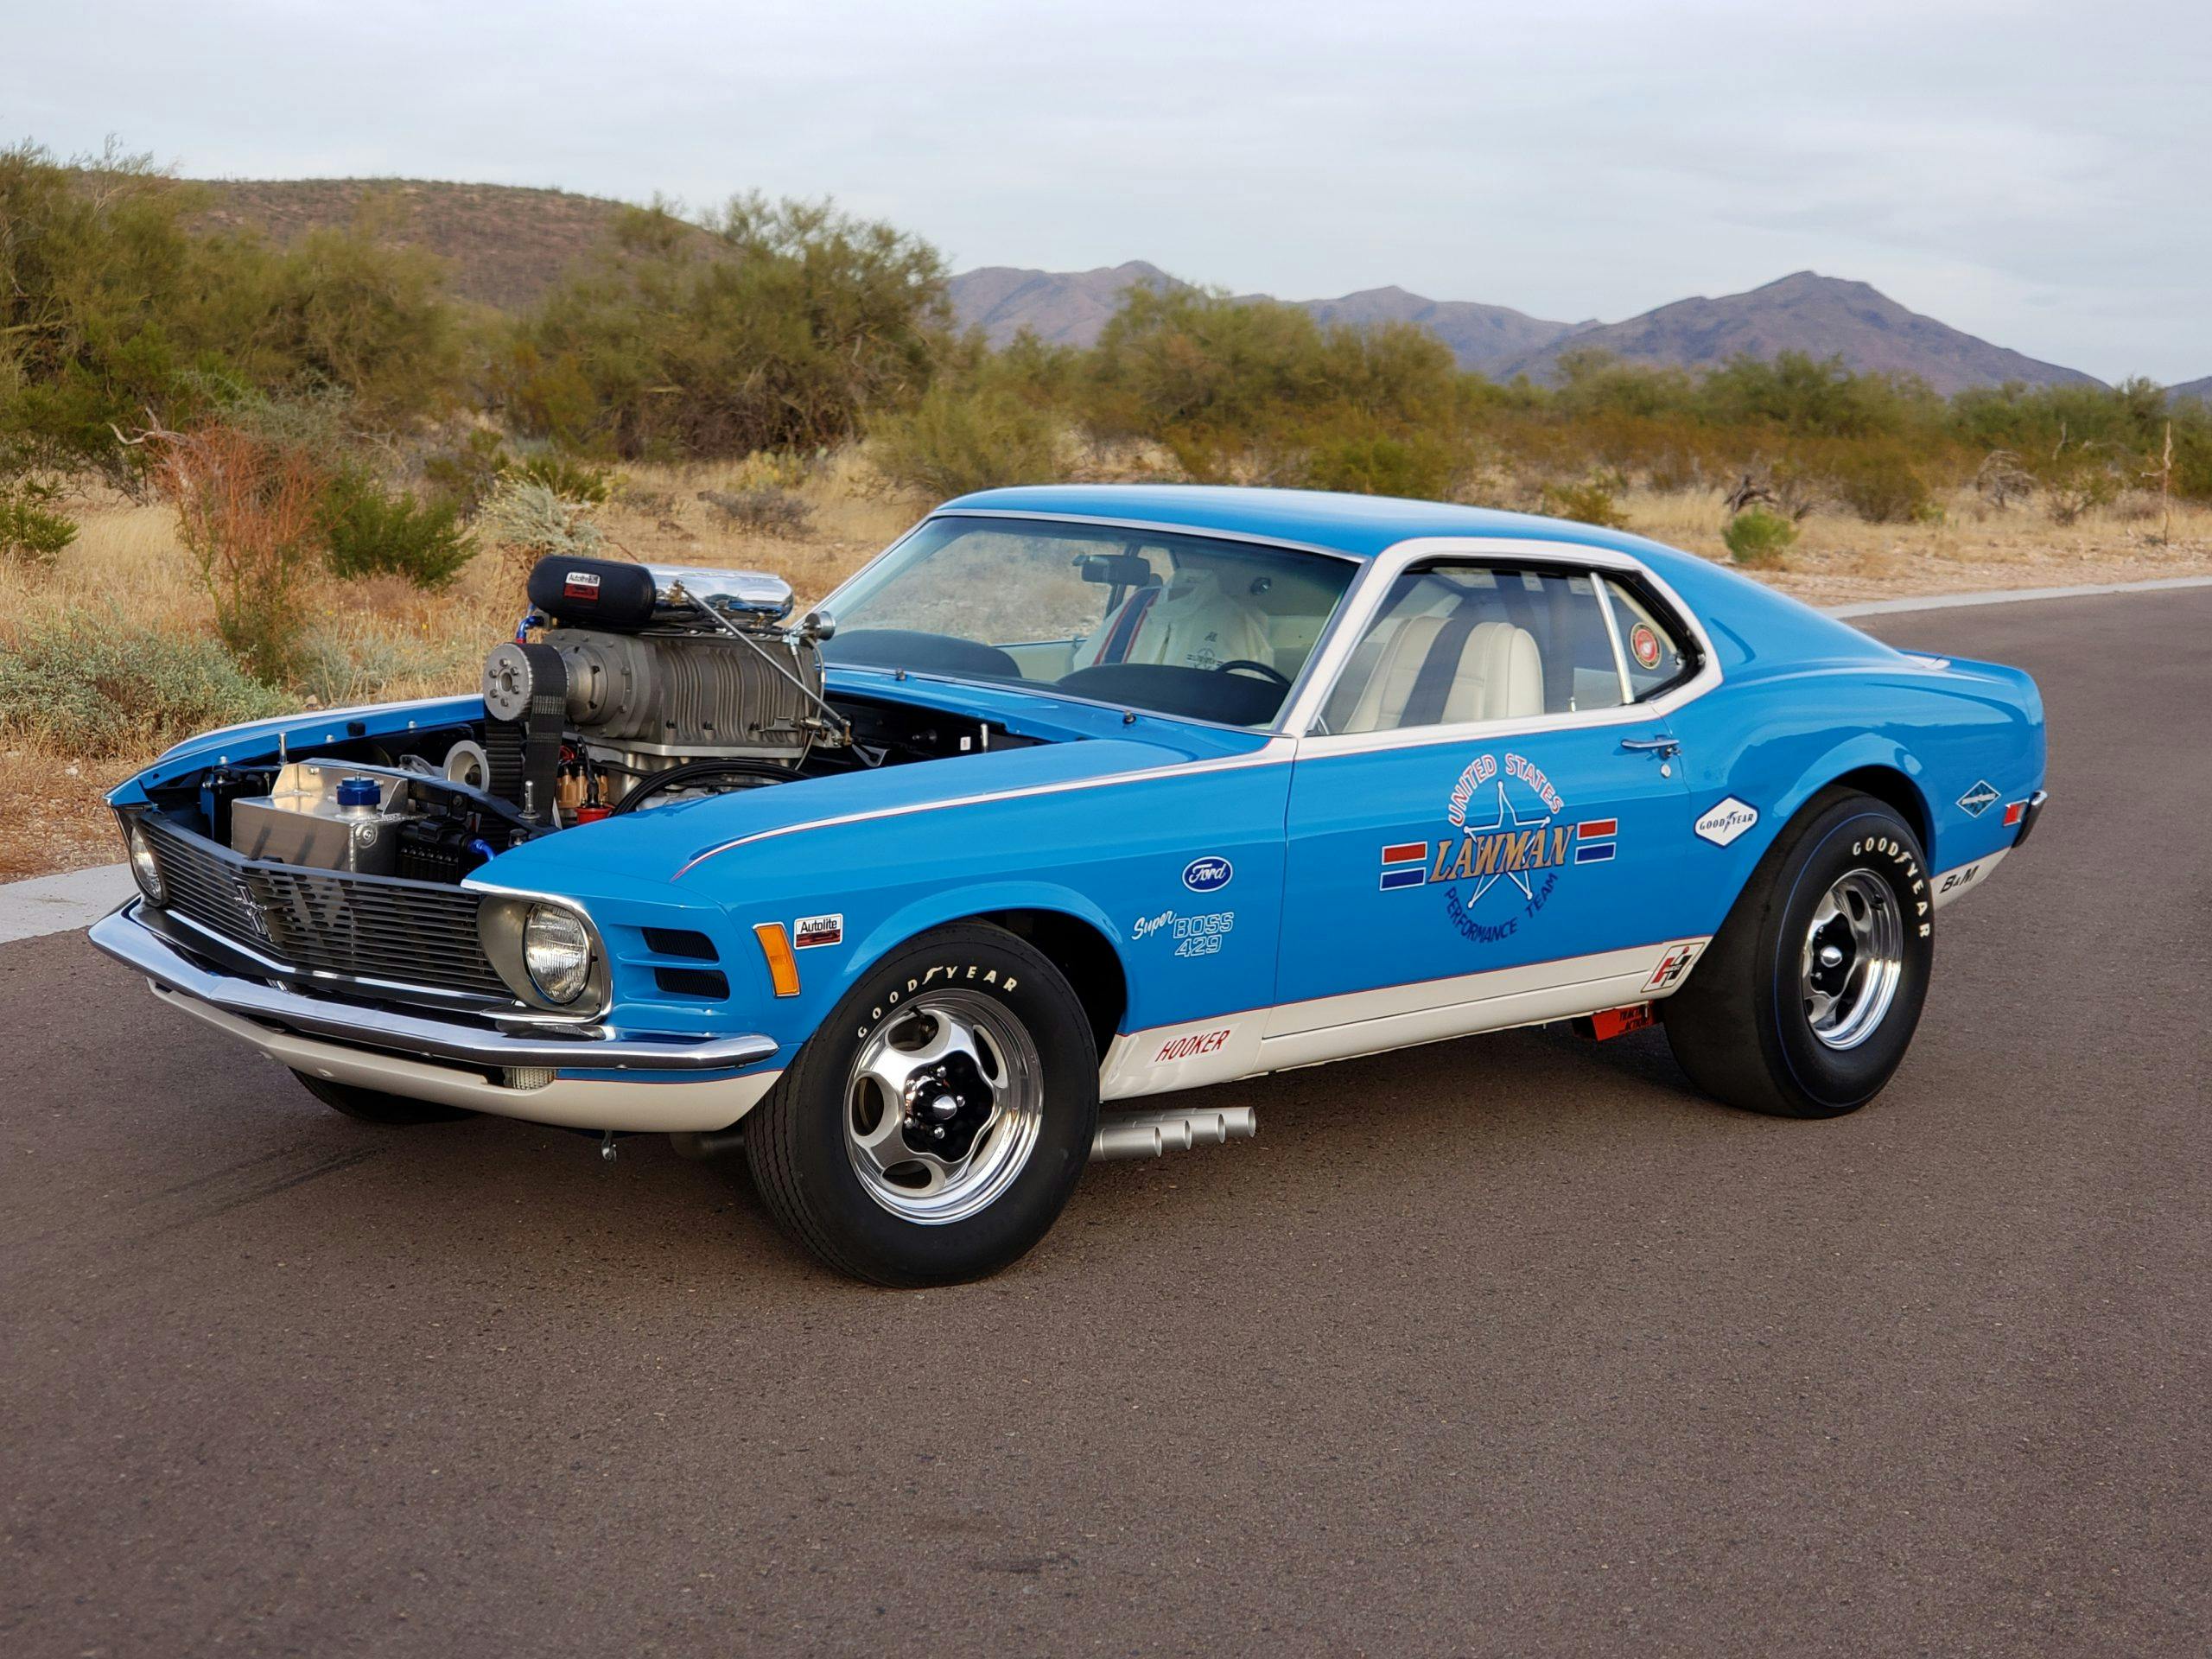 Lawman Boss 429 Ford Mustang front three-quarter